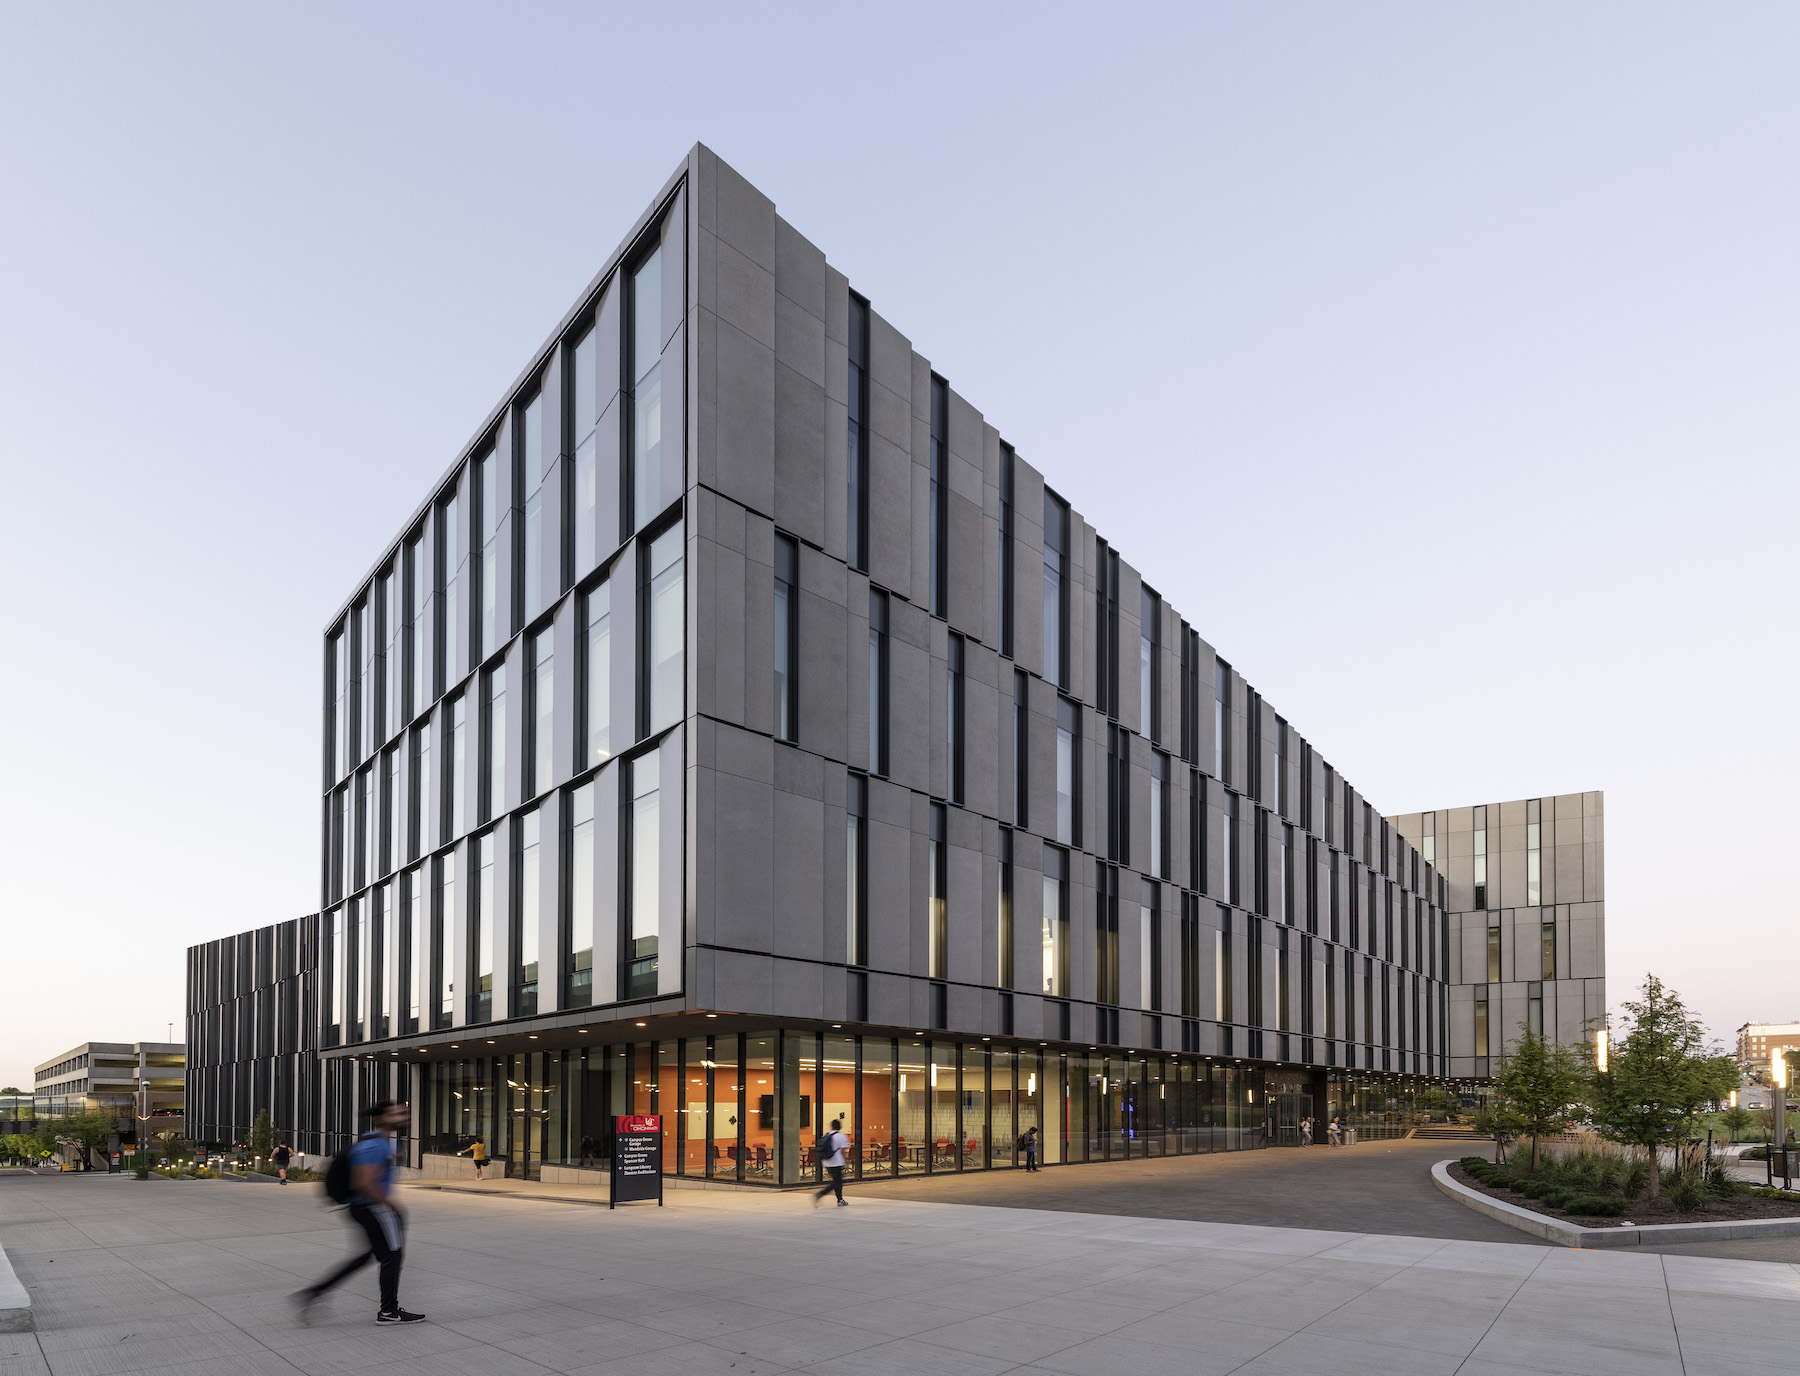 Photo: PEDCO provided MEP engineering design for the University of Cincinnati’s LEED Gold Lindner College of Business. The new, 225,000 square-foot facility was completed in 2019. Courtesy PEDCO 